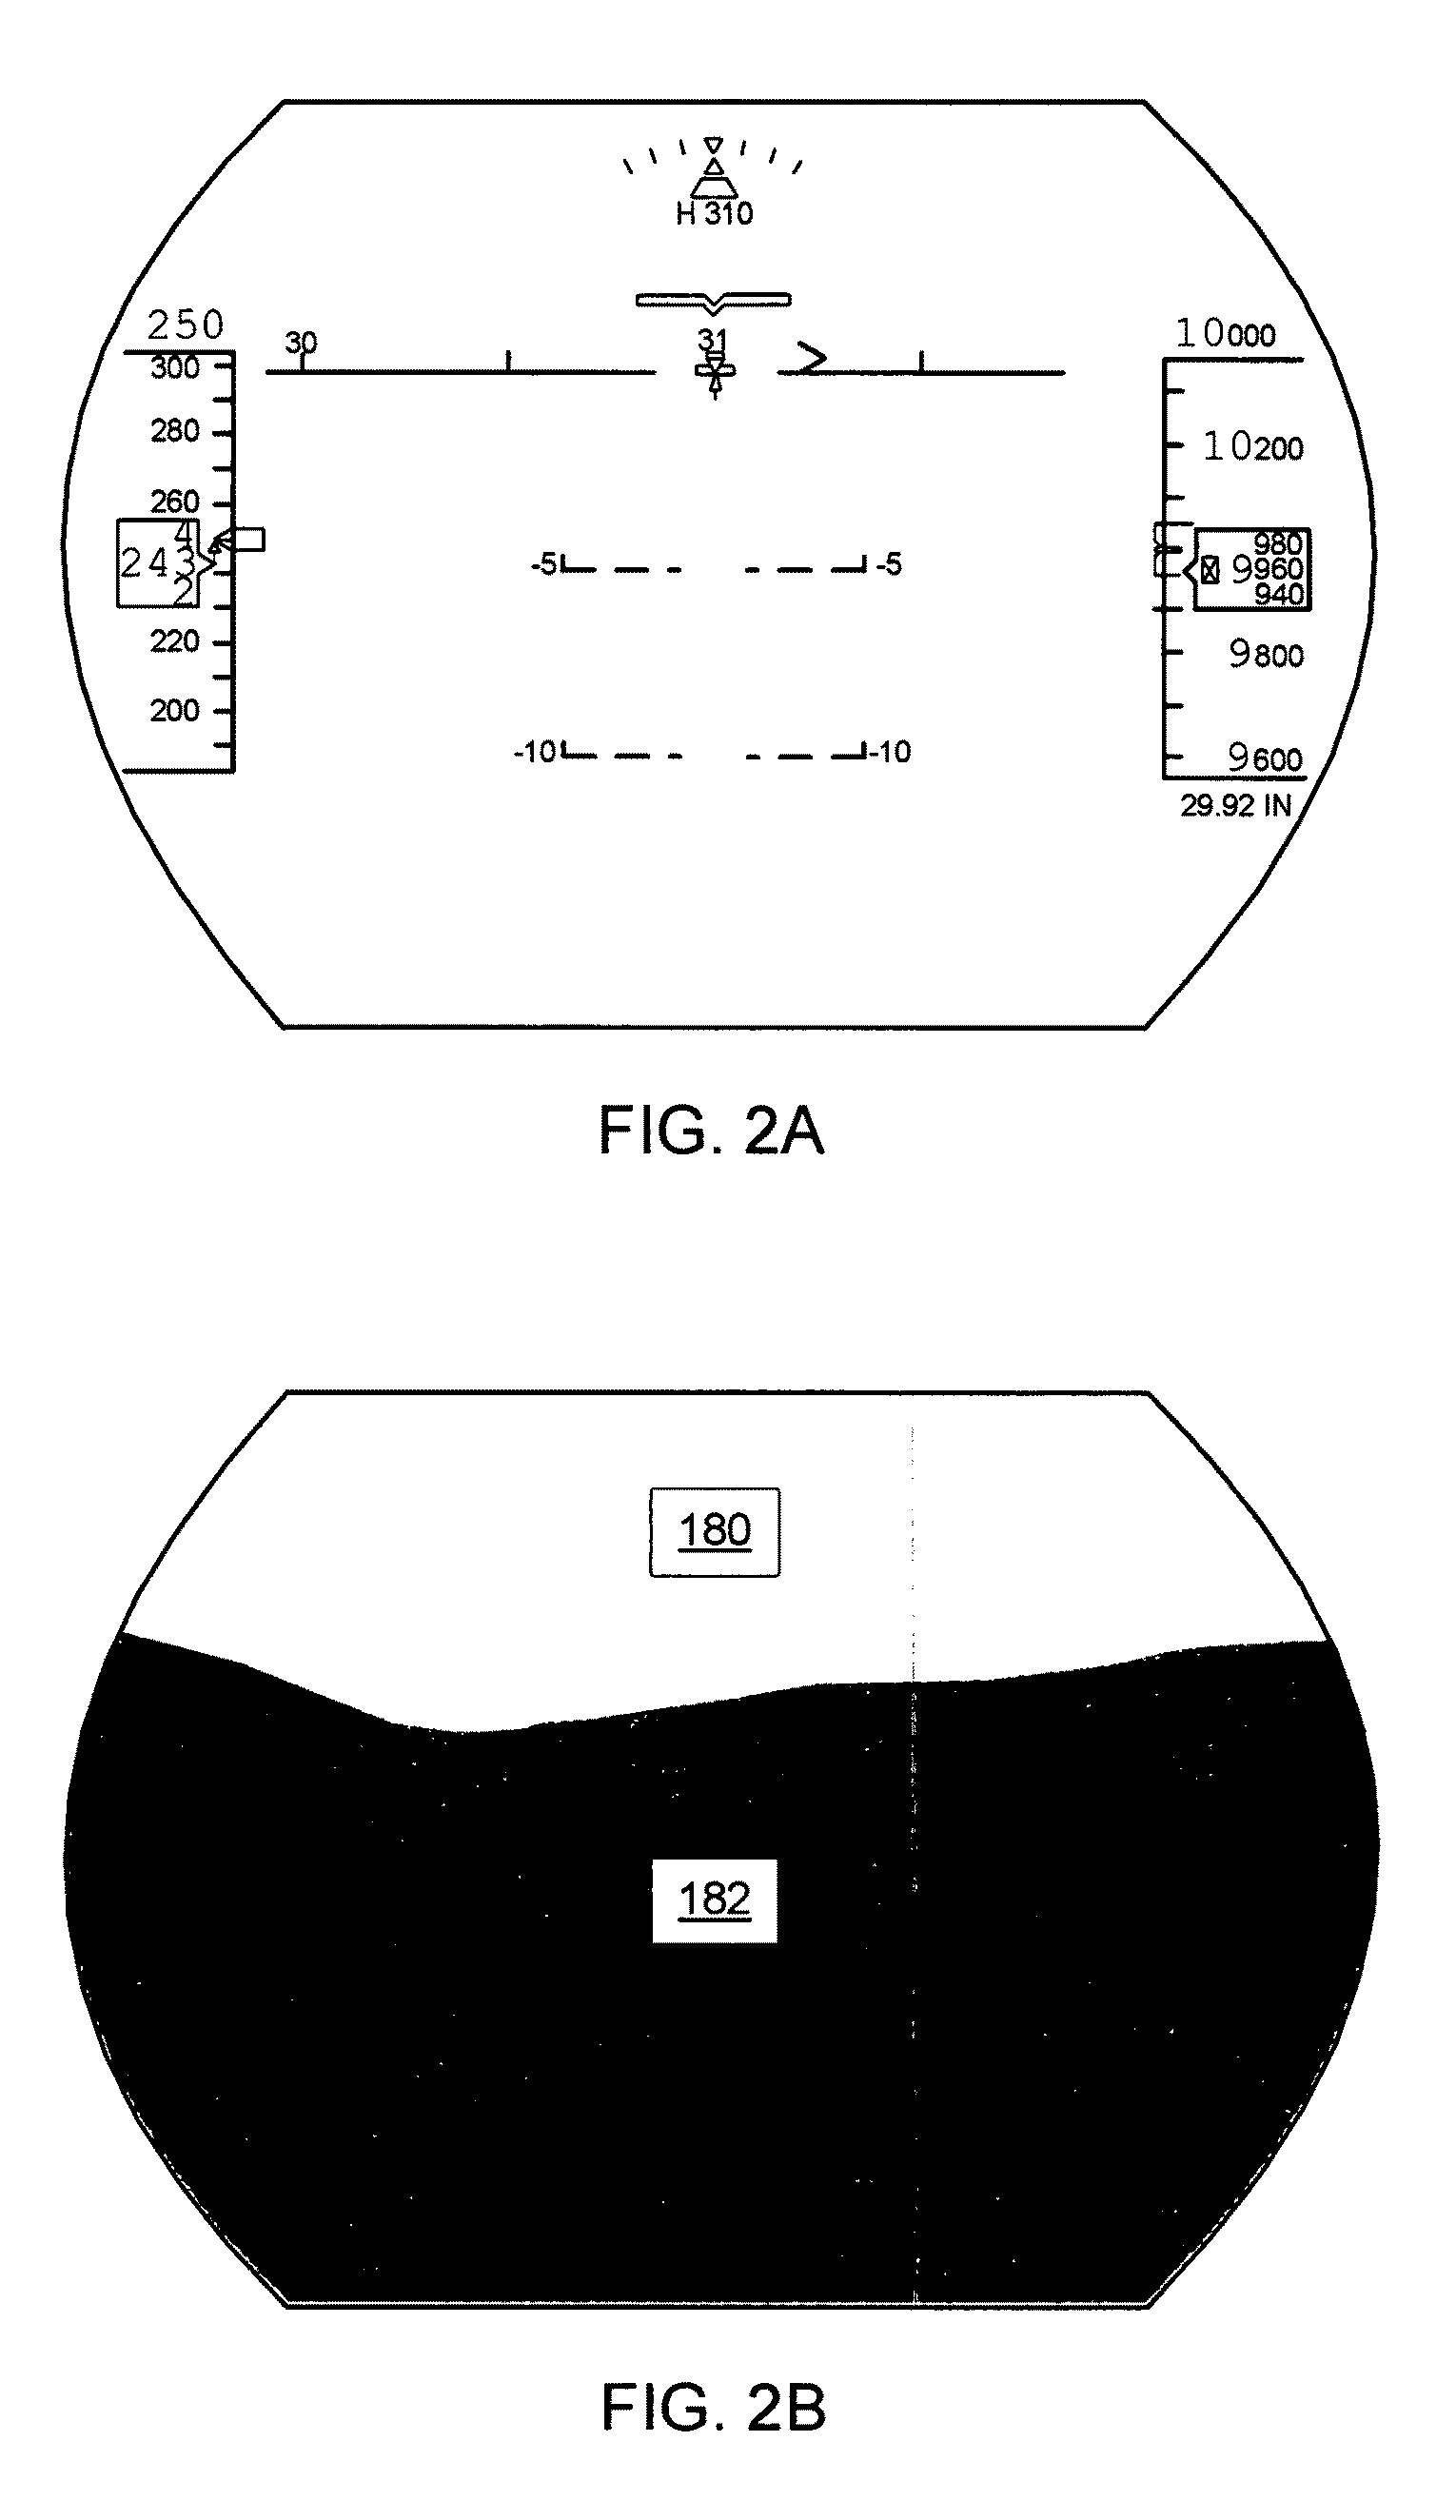 System and methods for displaying a partial images and non-overlapping, shared-screen partial images acquired from vision systems